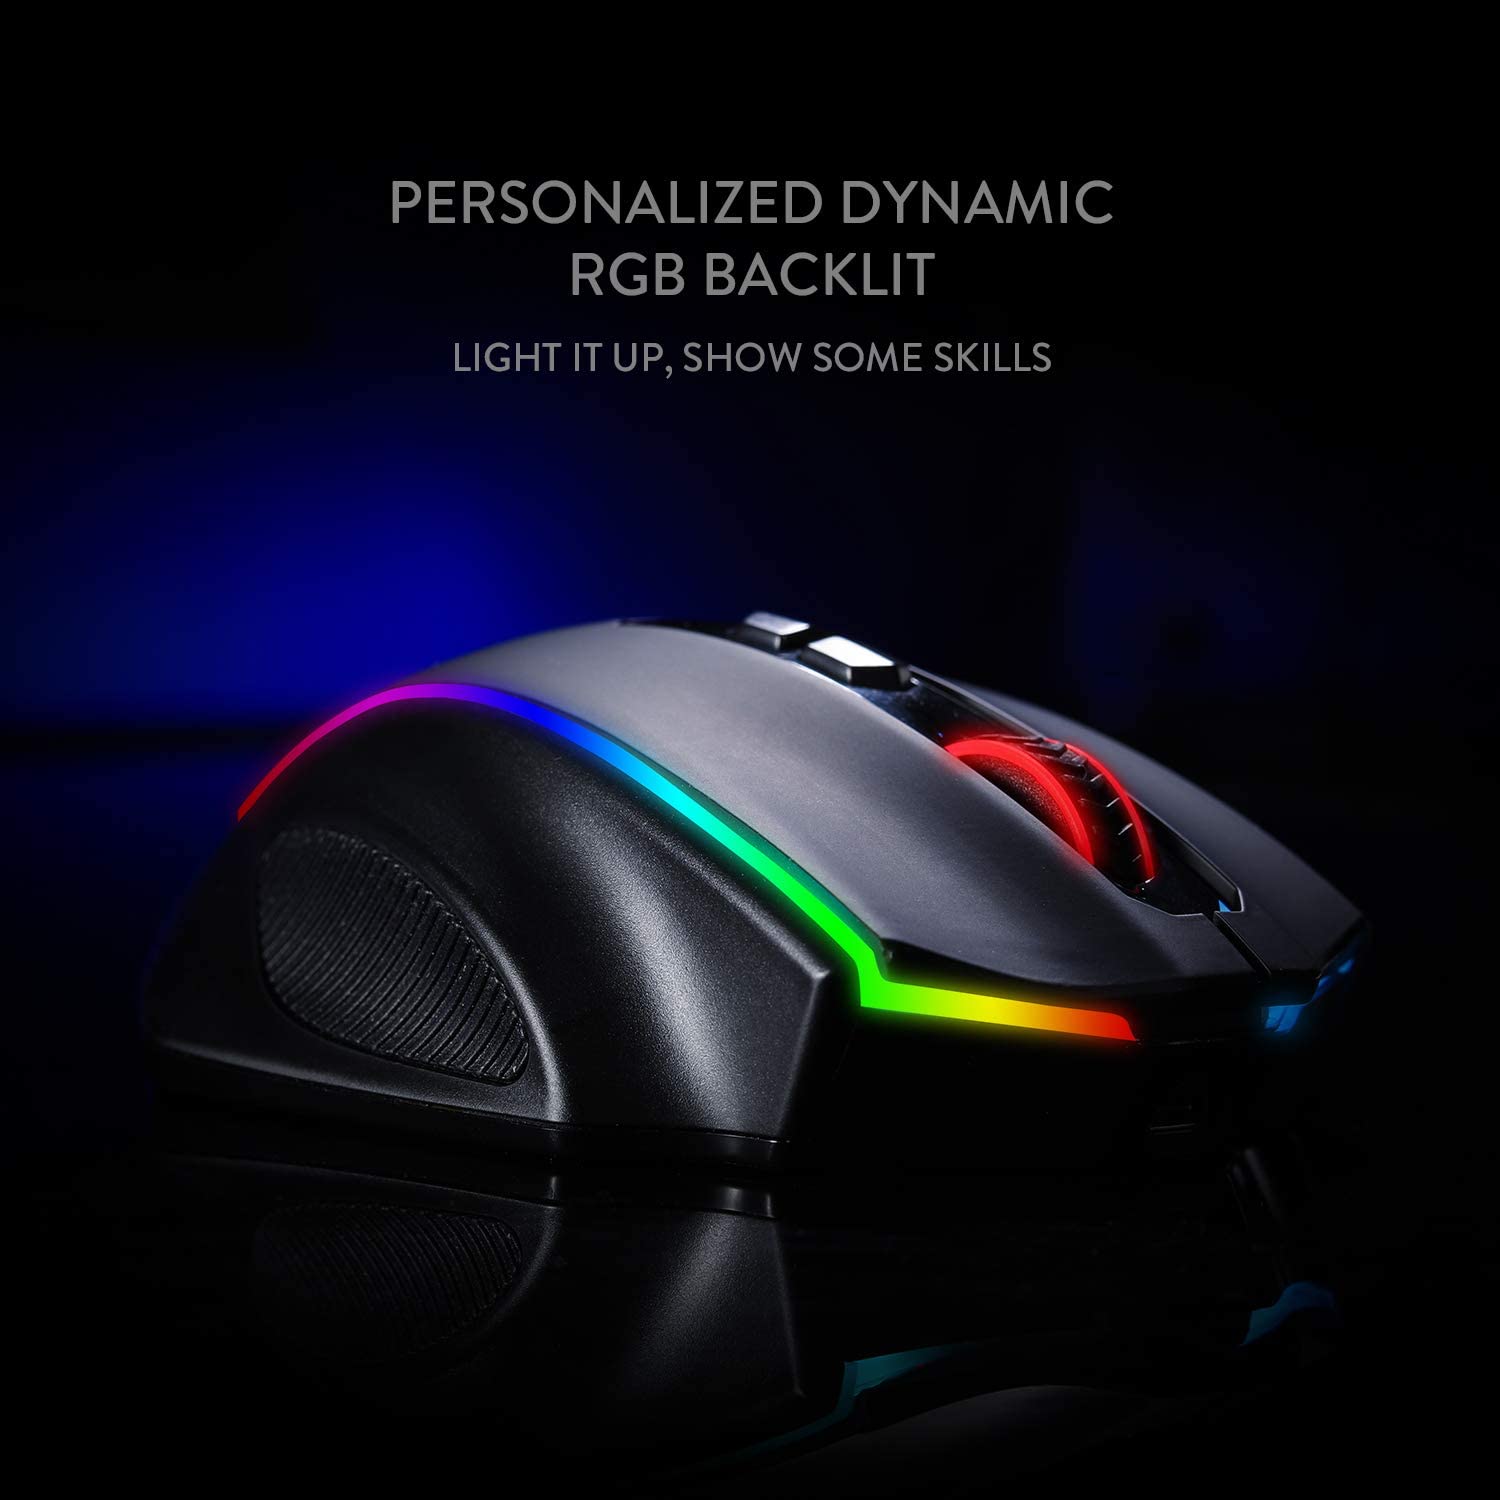 Redragon Vampire Elite M686 (Wired and Wireless) RGB